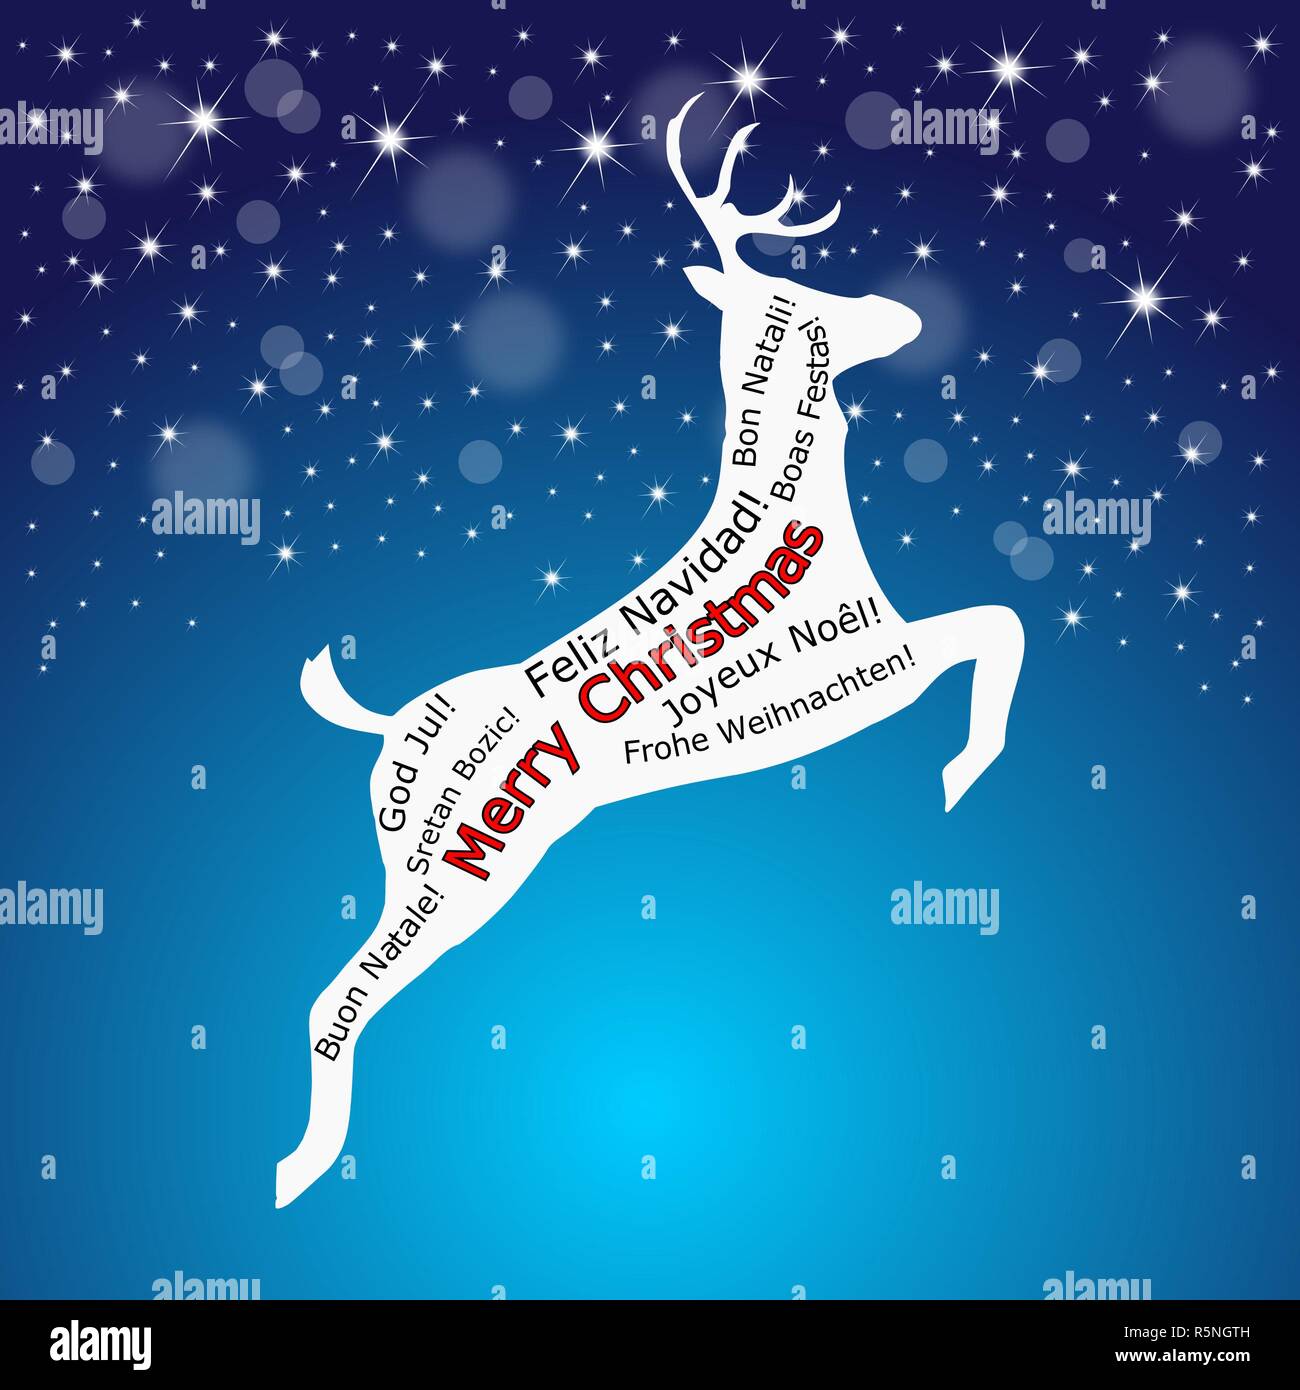 Merry Christmas wordcloud on a reindeer on glossy blue background - illustration Stock Photo